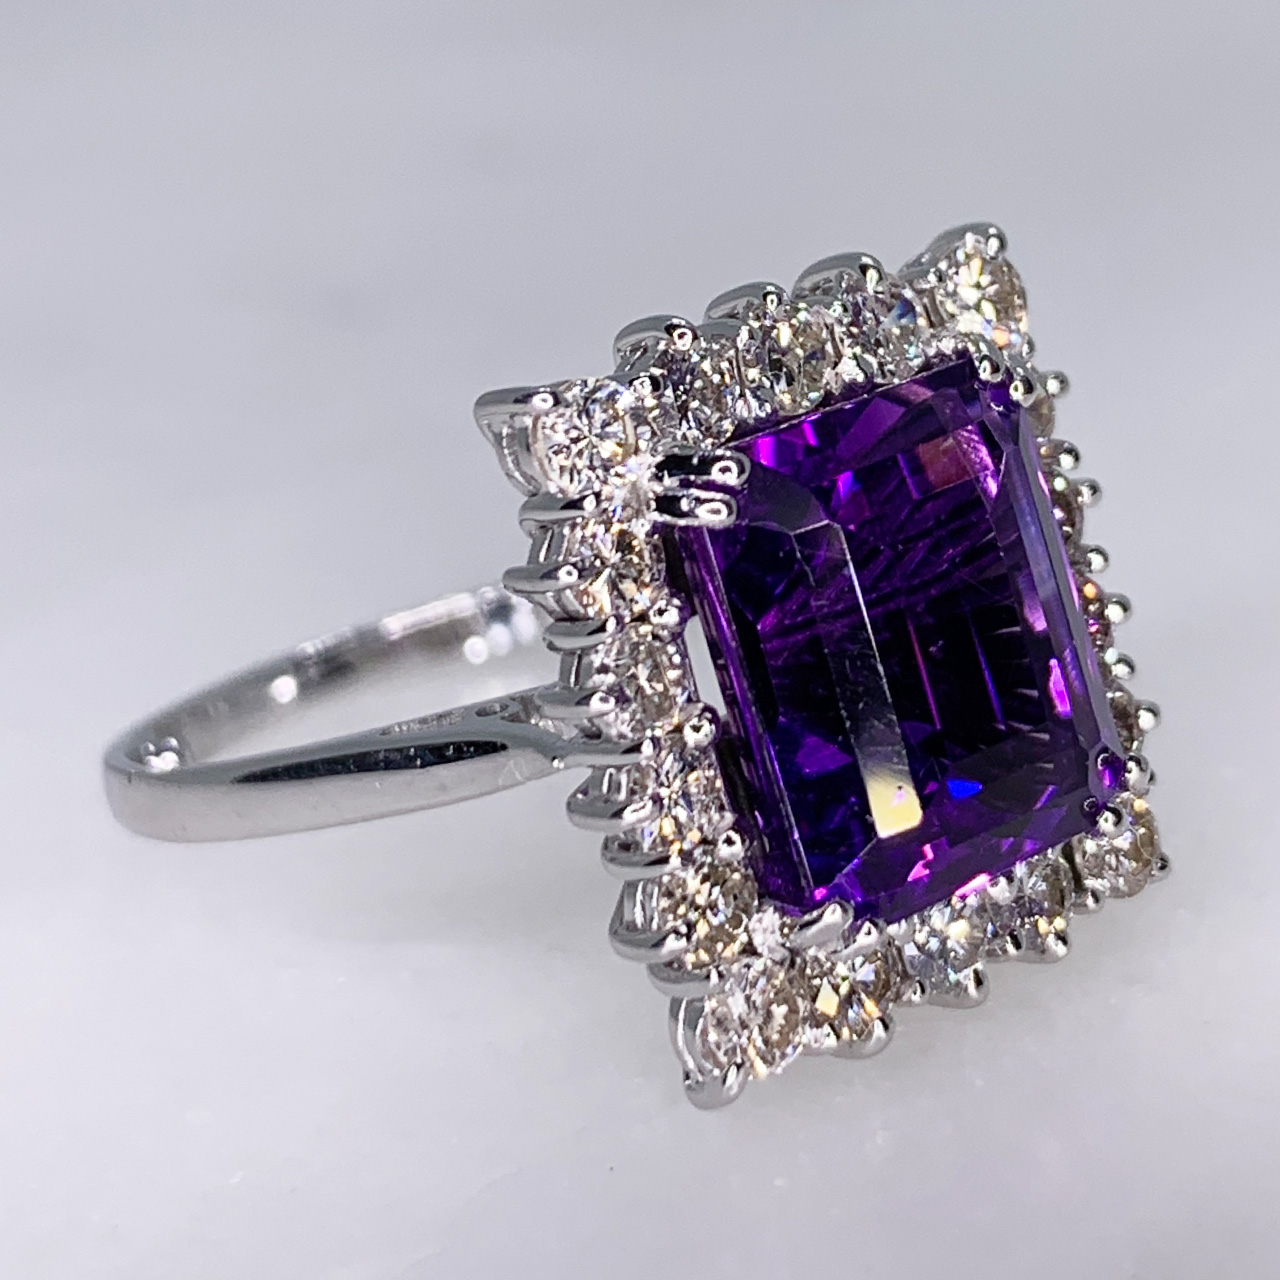 Vintage Amethyst and Diamond Rectangular Cluster set in Platinum. This exquisite emerald cut multi-tone Amethyst measures approximately 9mm x 11mm with a total weight of 7 carats. The central Amethyst is surrounded by 18 brilliant cut white diamonds total diamond weight 1 carat. All stones are claw set. The ring has a tiffany shank with size adjustment on the inside in perfect condition.